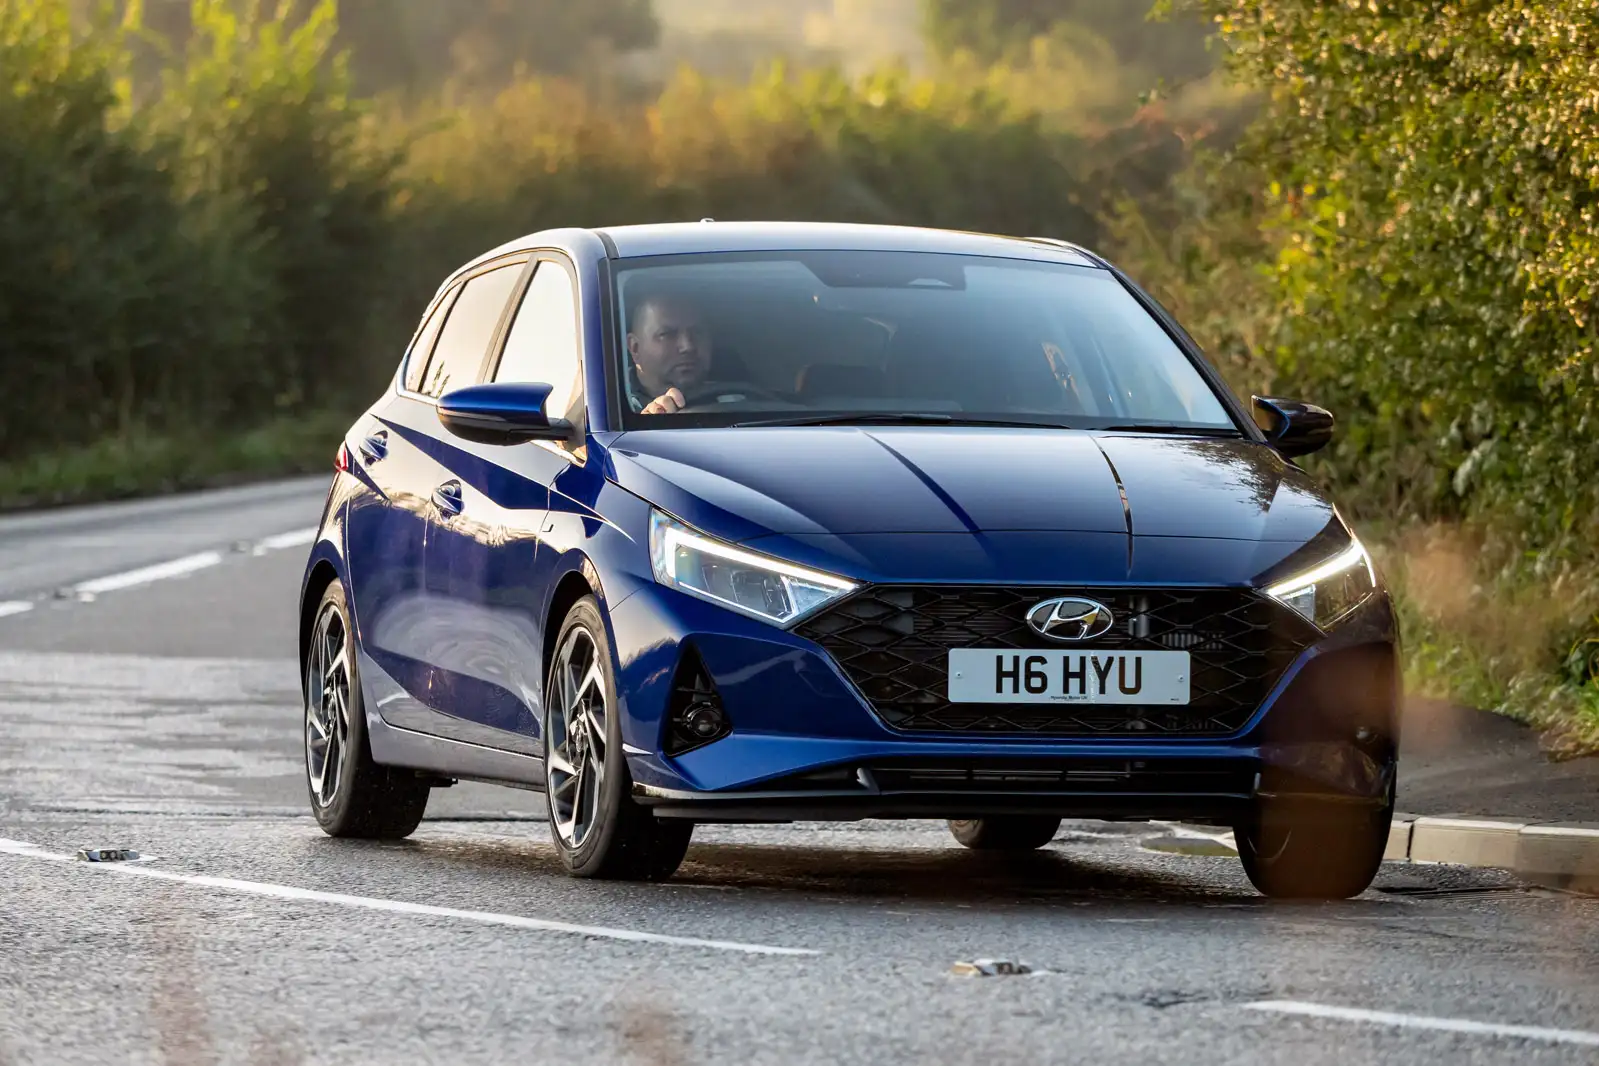 All-new i20 - First Drive Review